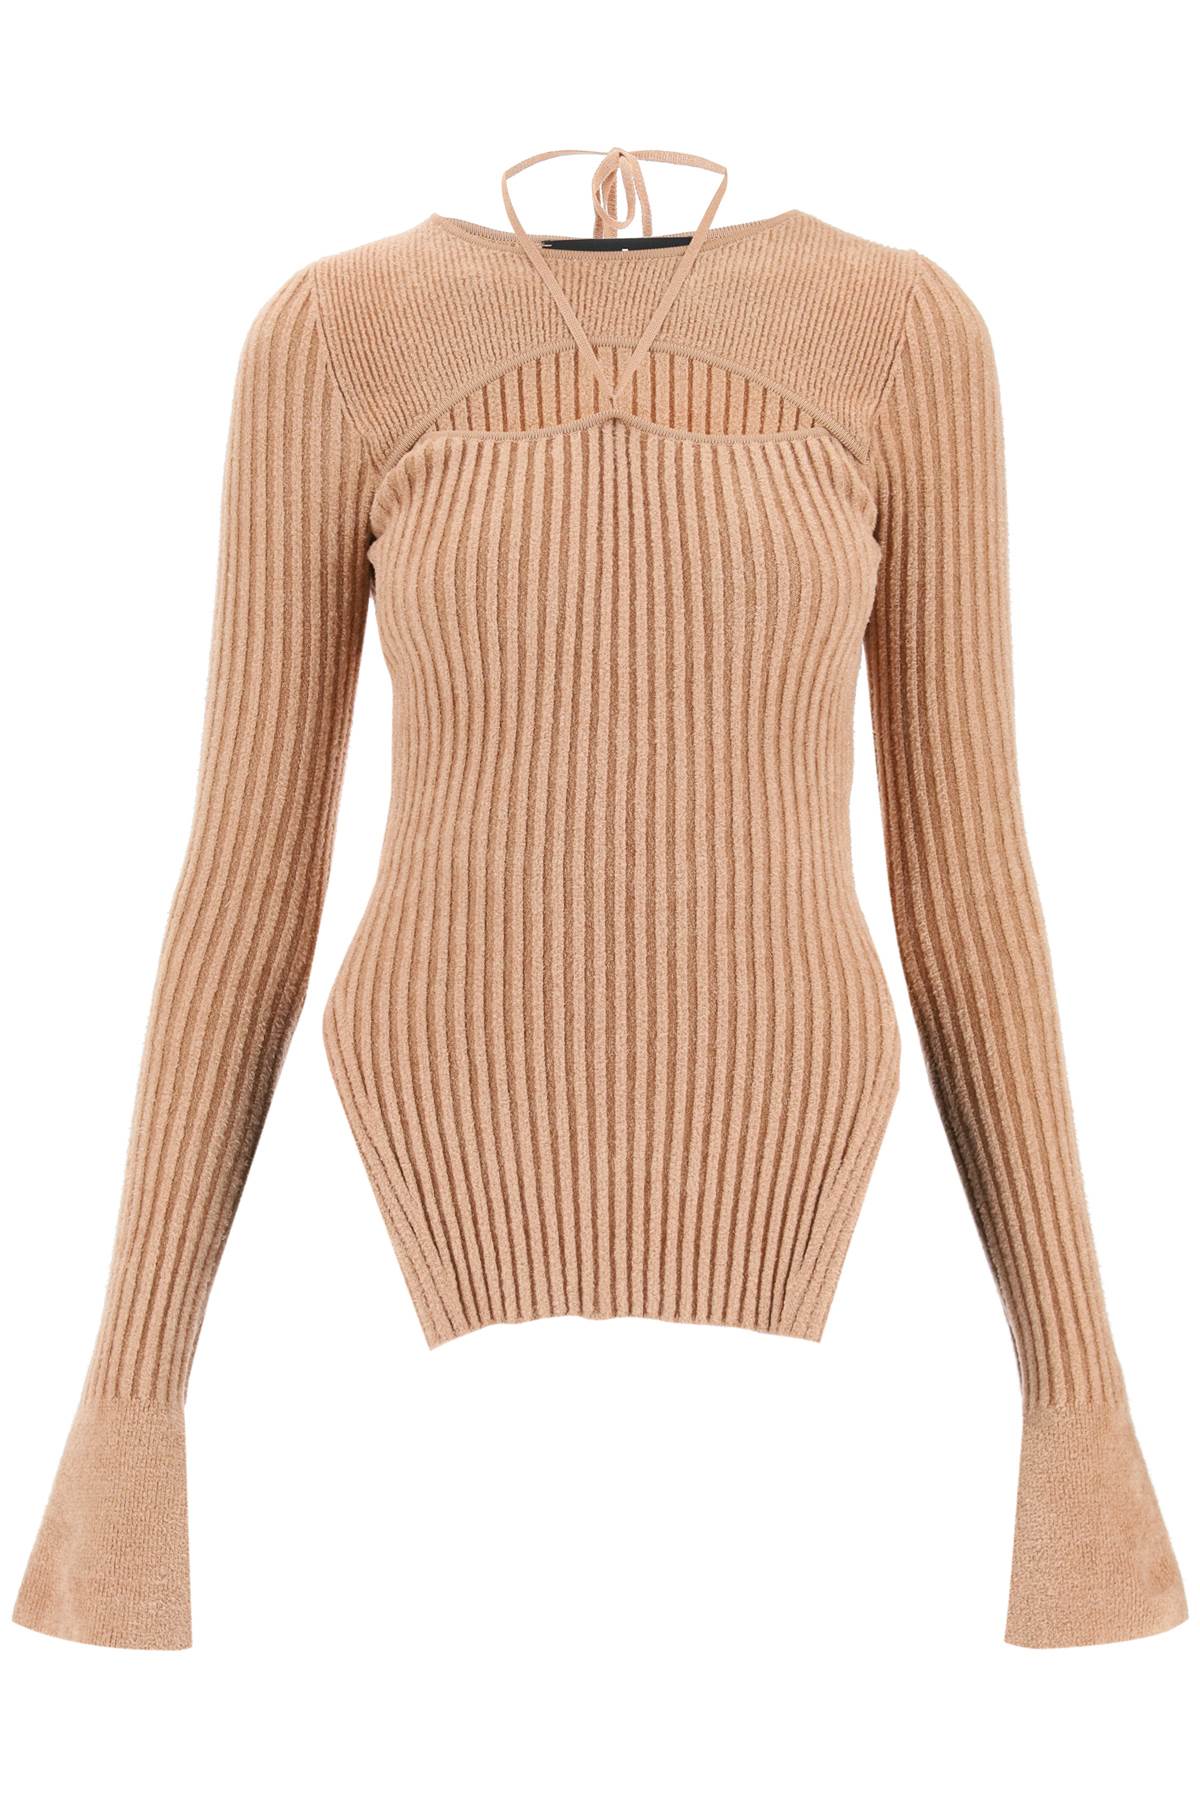 ANDREÄDAMO RIBBED KNIT TOP WITH CUT-OUT